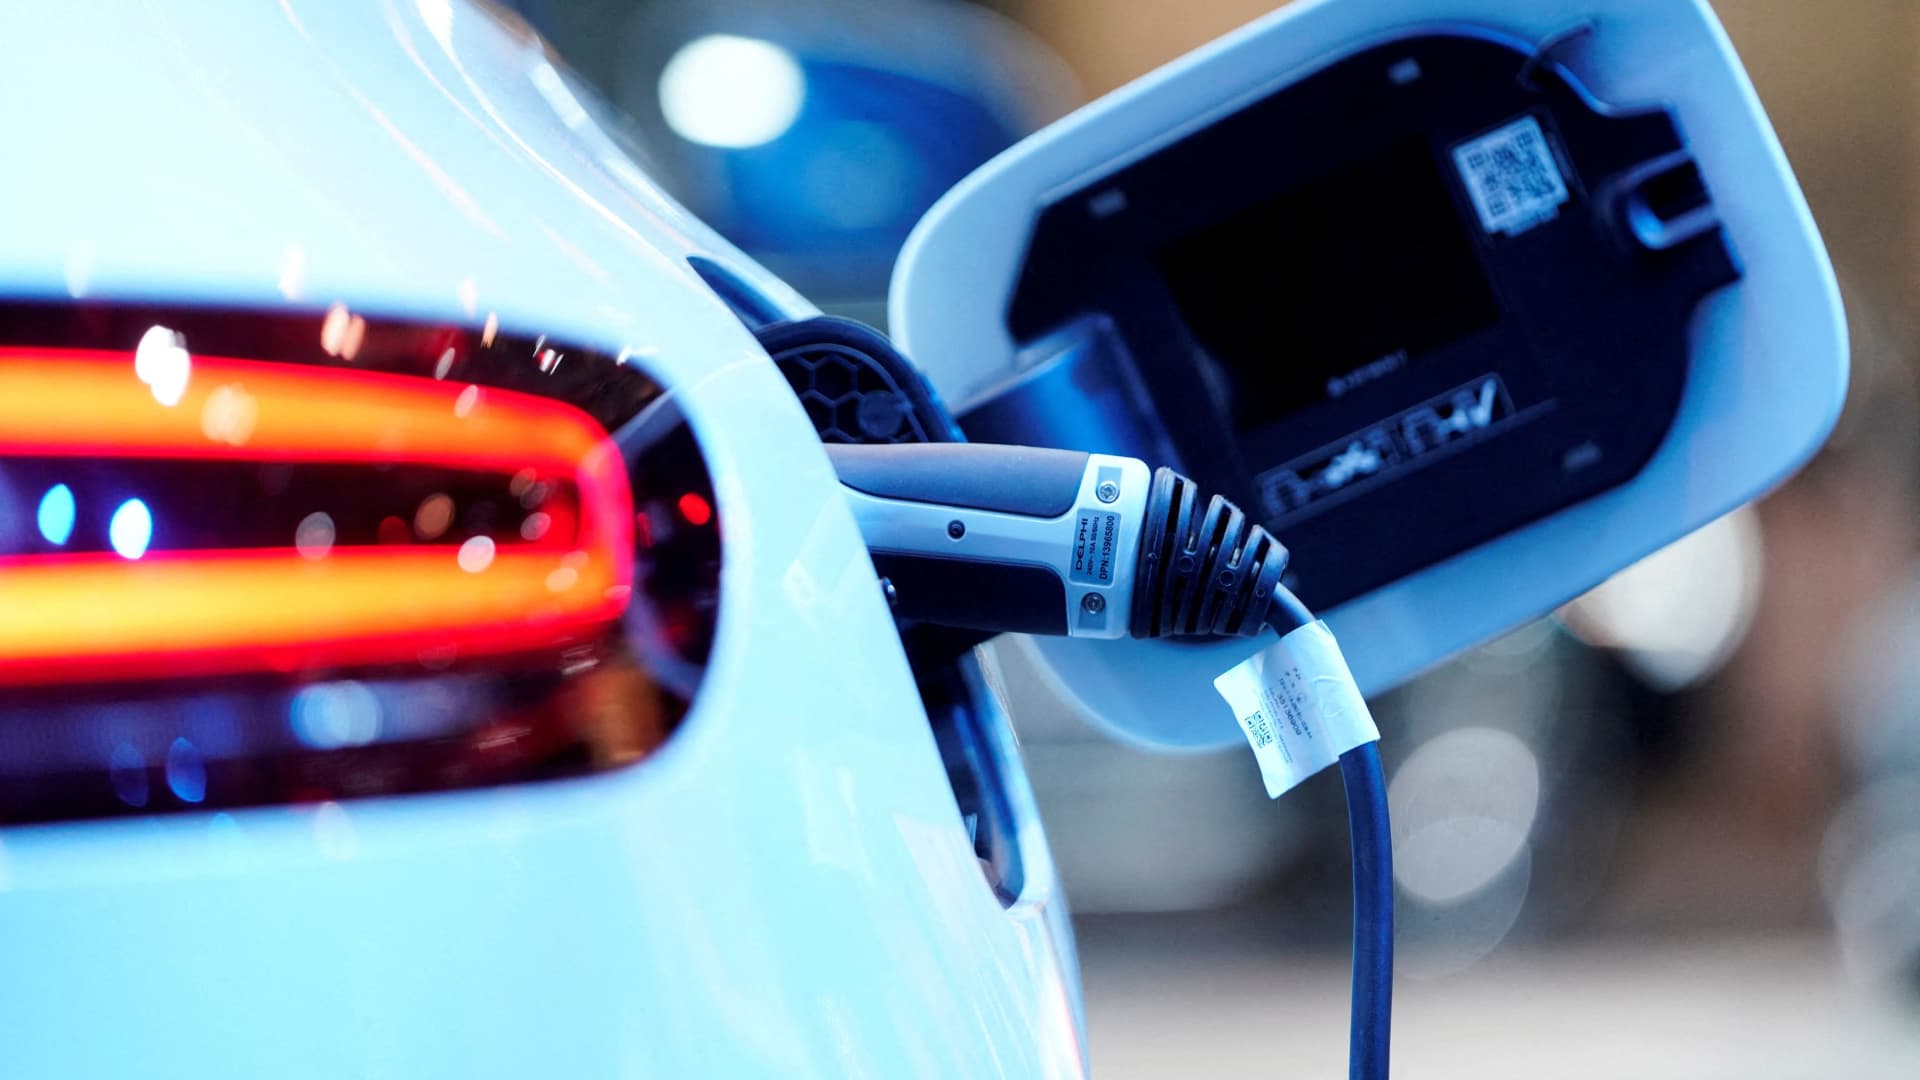 Every new passenger car sold in the world will be electric by 2040, says Exxon Mobil CEO Darren Woods